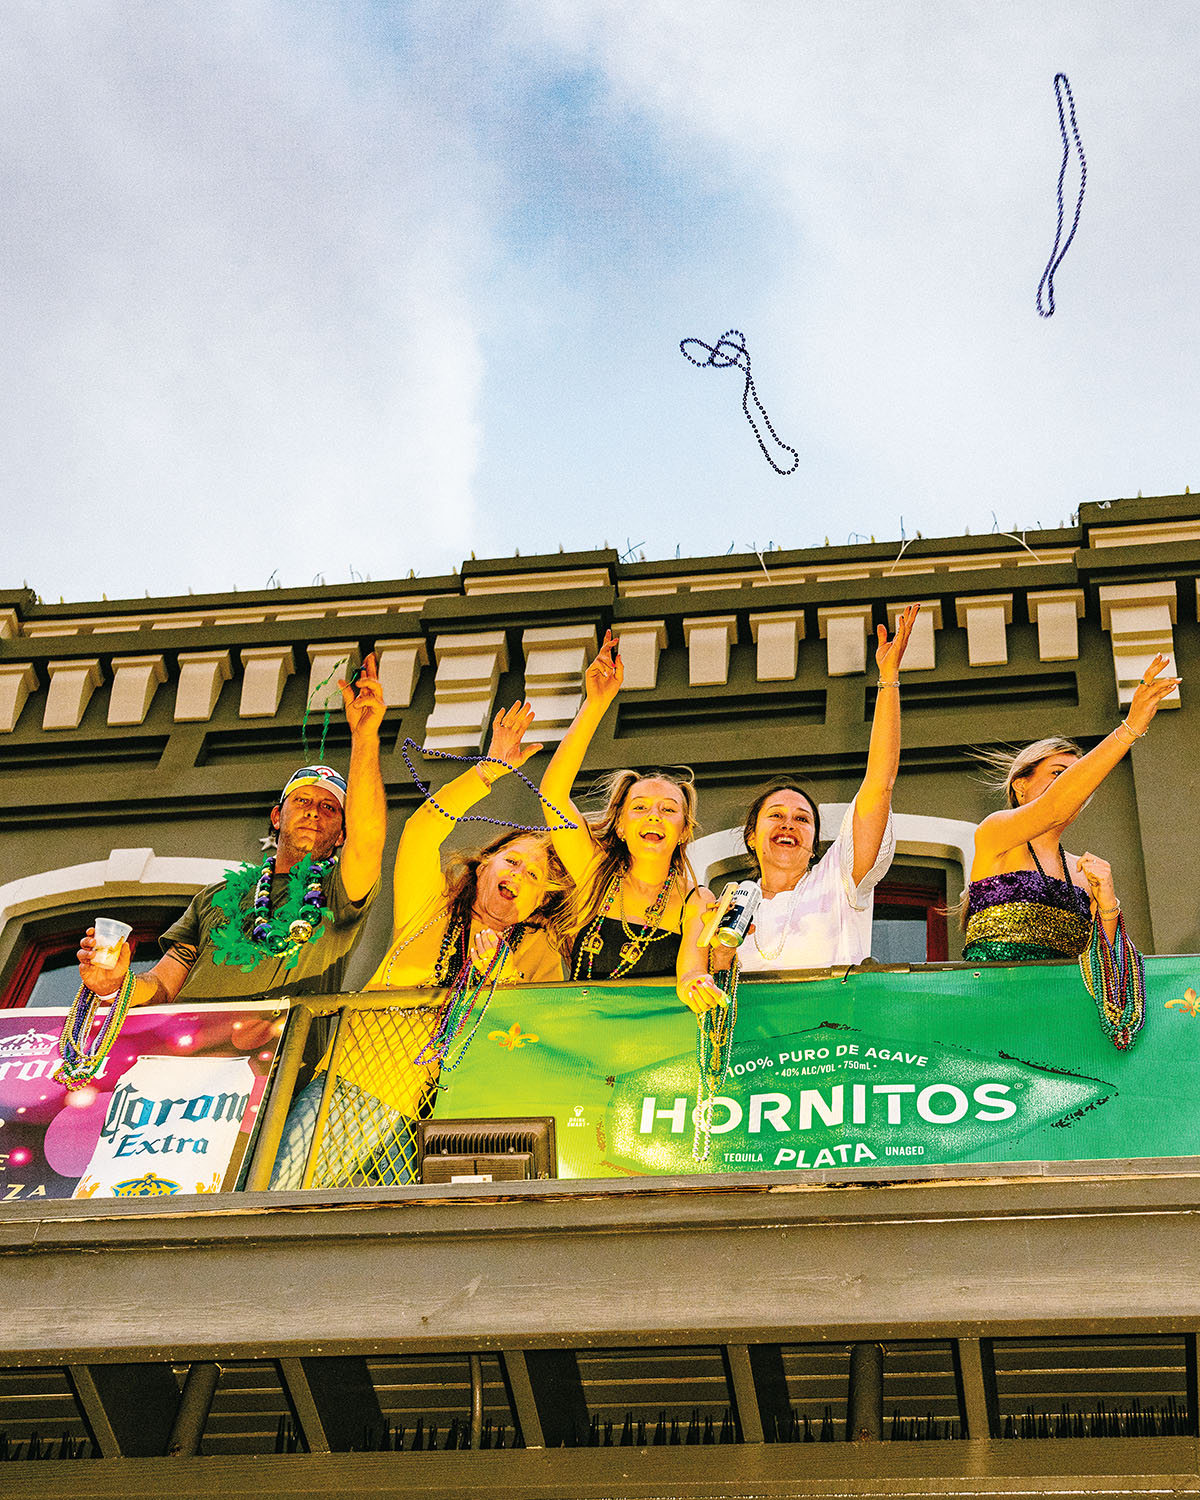 A group of people throw beads from a balcony, decorated and lit in bright yellow and green color